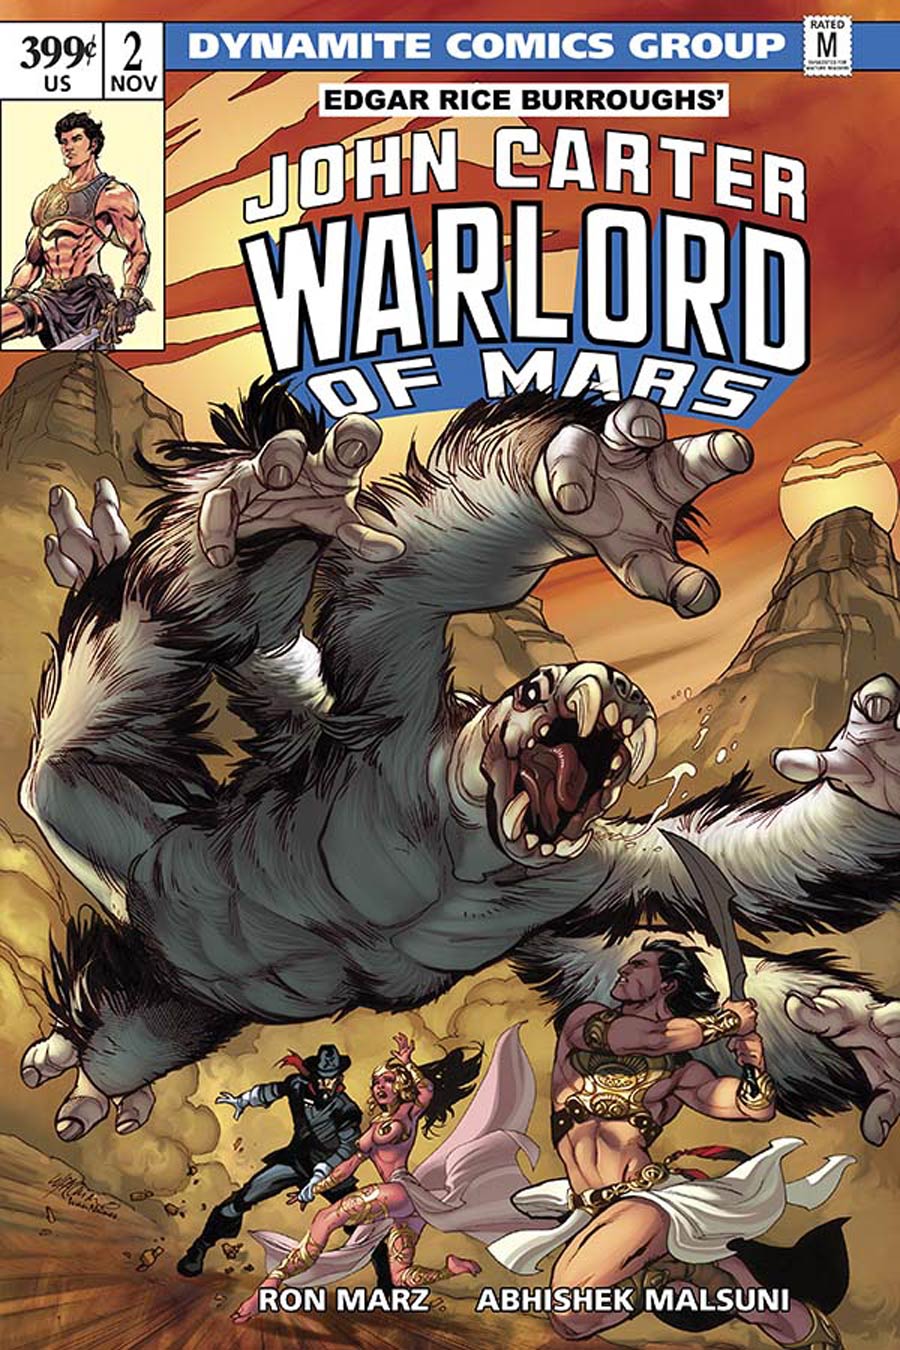 John Carter Warlord Of Mars Vol 2 #2 Cover C Variant Emanuela Lupacchino Cover